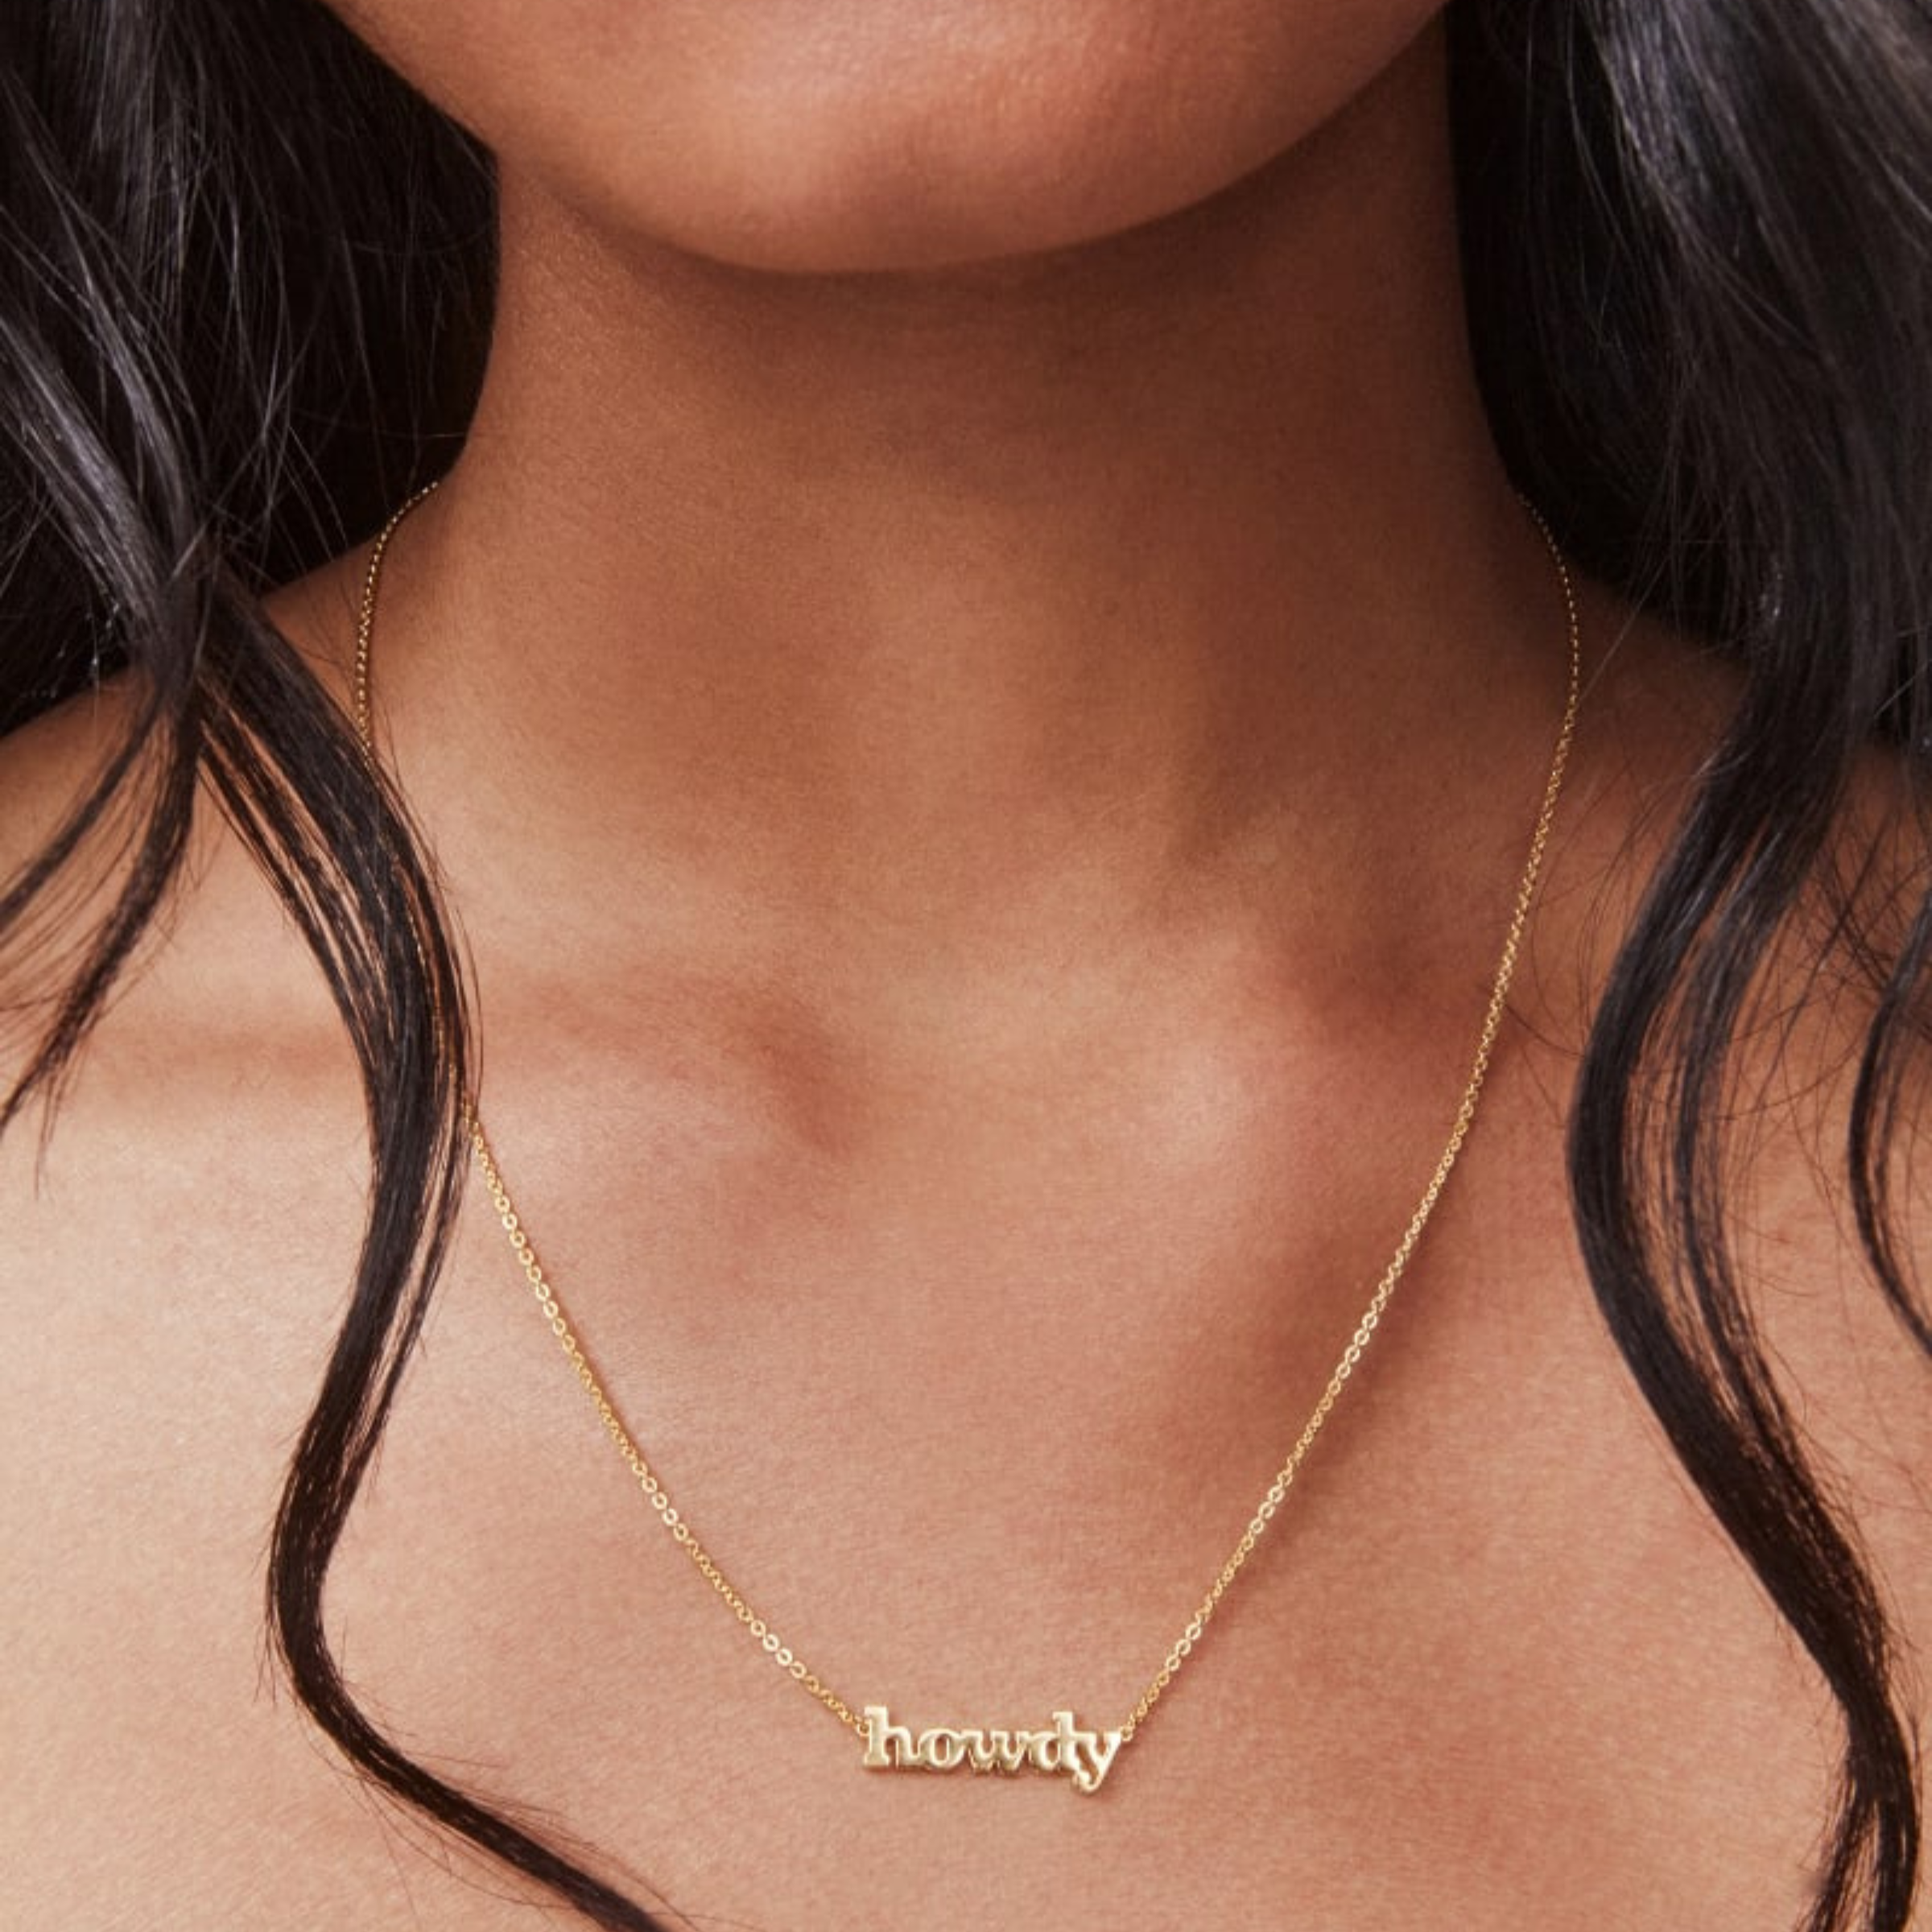 Kendra Scott | Howdy Pendant Necklace in 18k Gold Yellow Gold Vermeil - Giddy Up Glamour Boutique